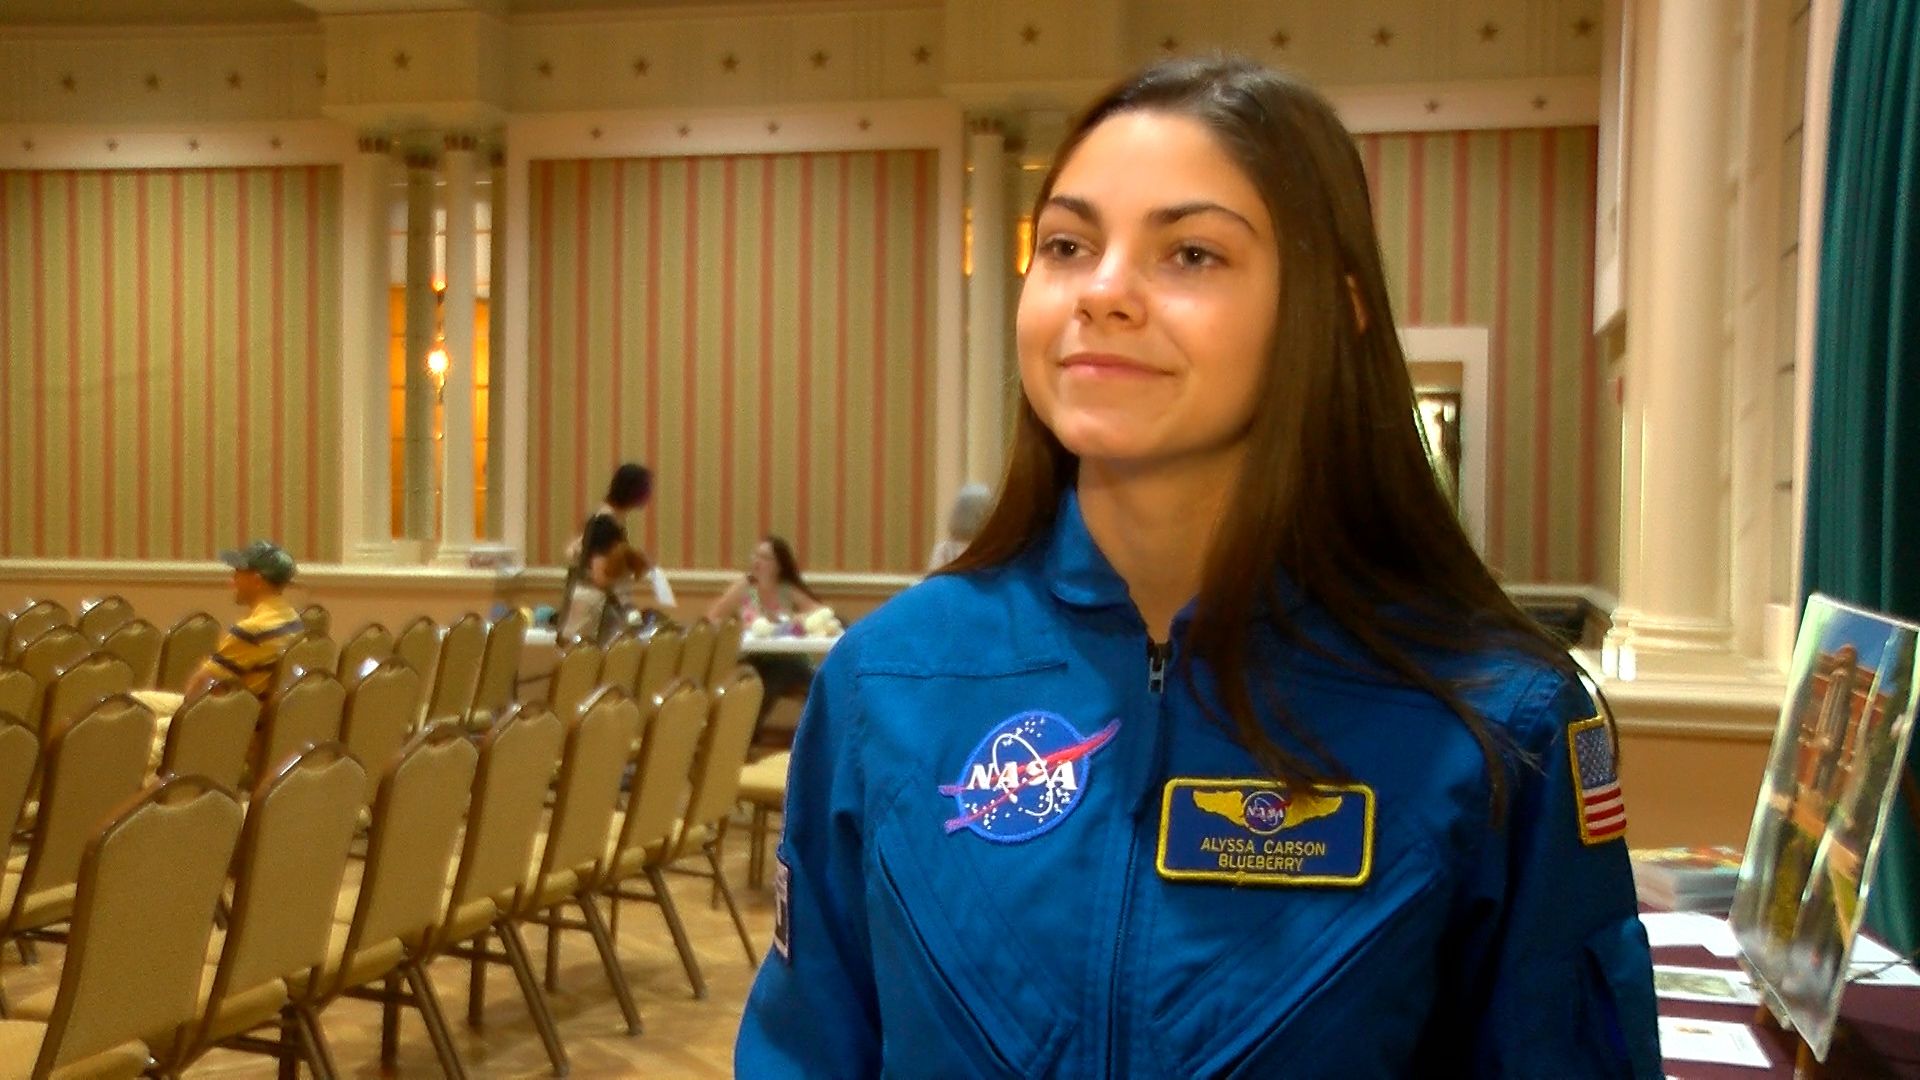 NASA Astronaut in training, featured in Netflix movie comes to Wichita Falls